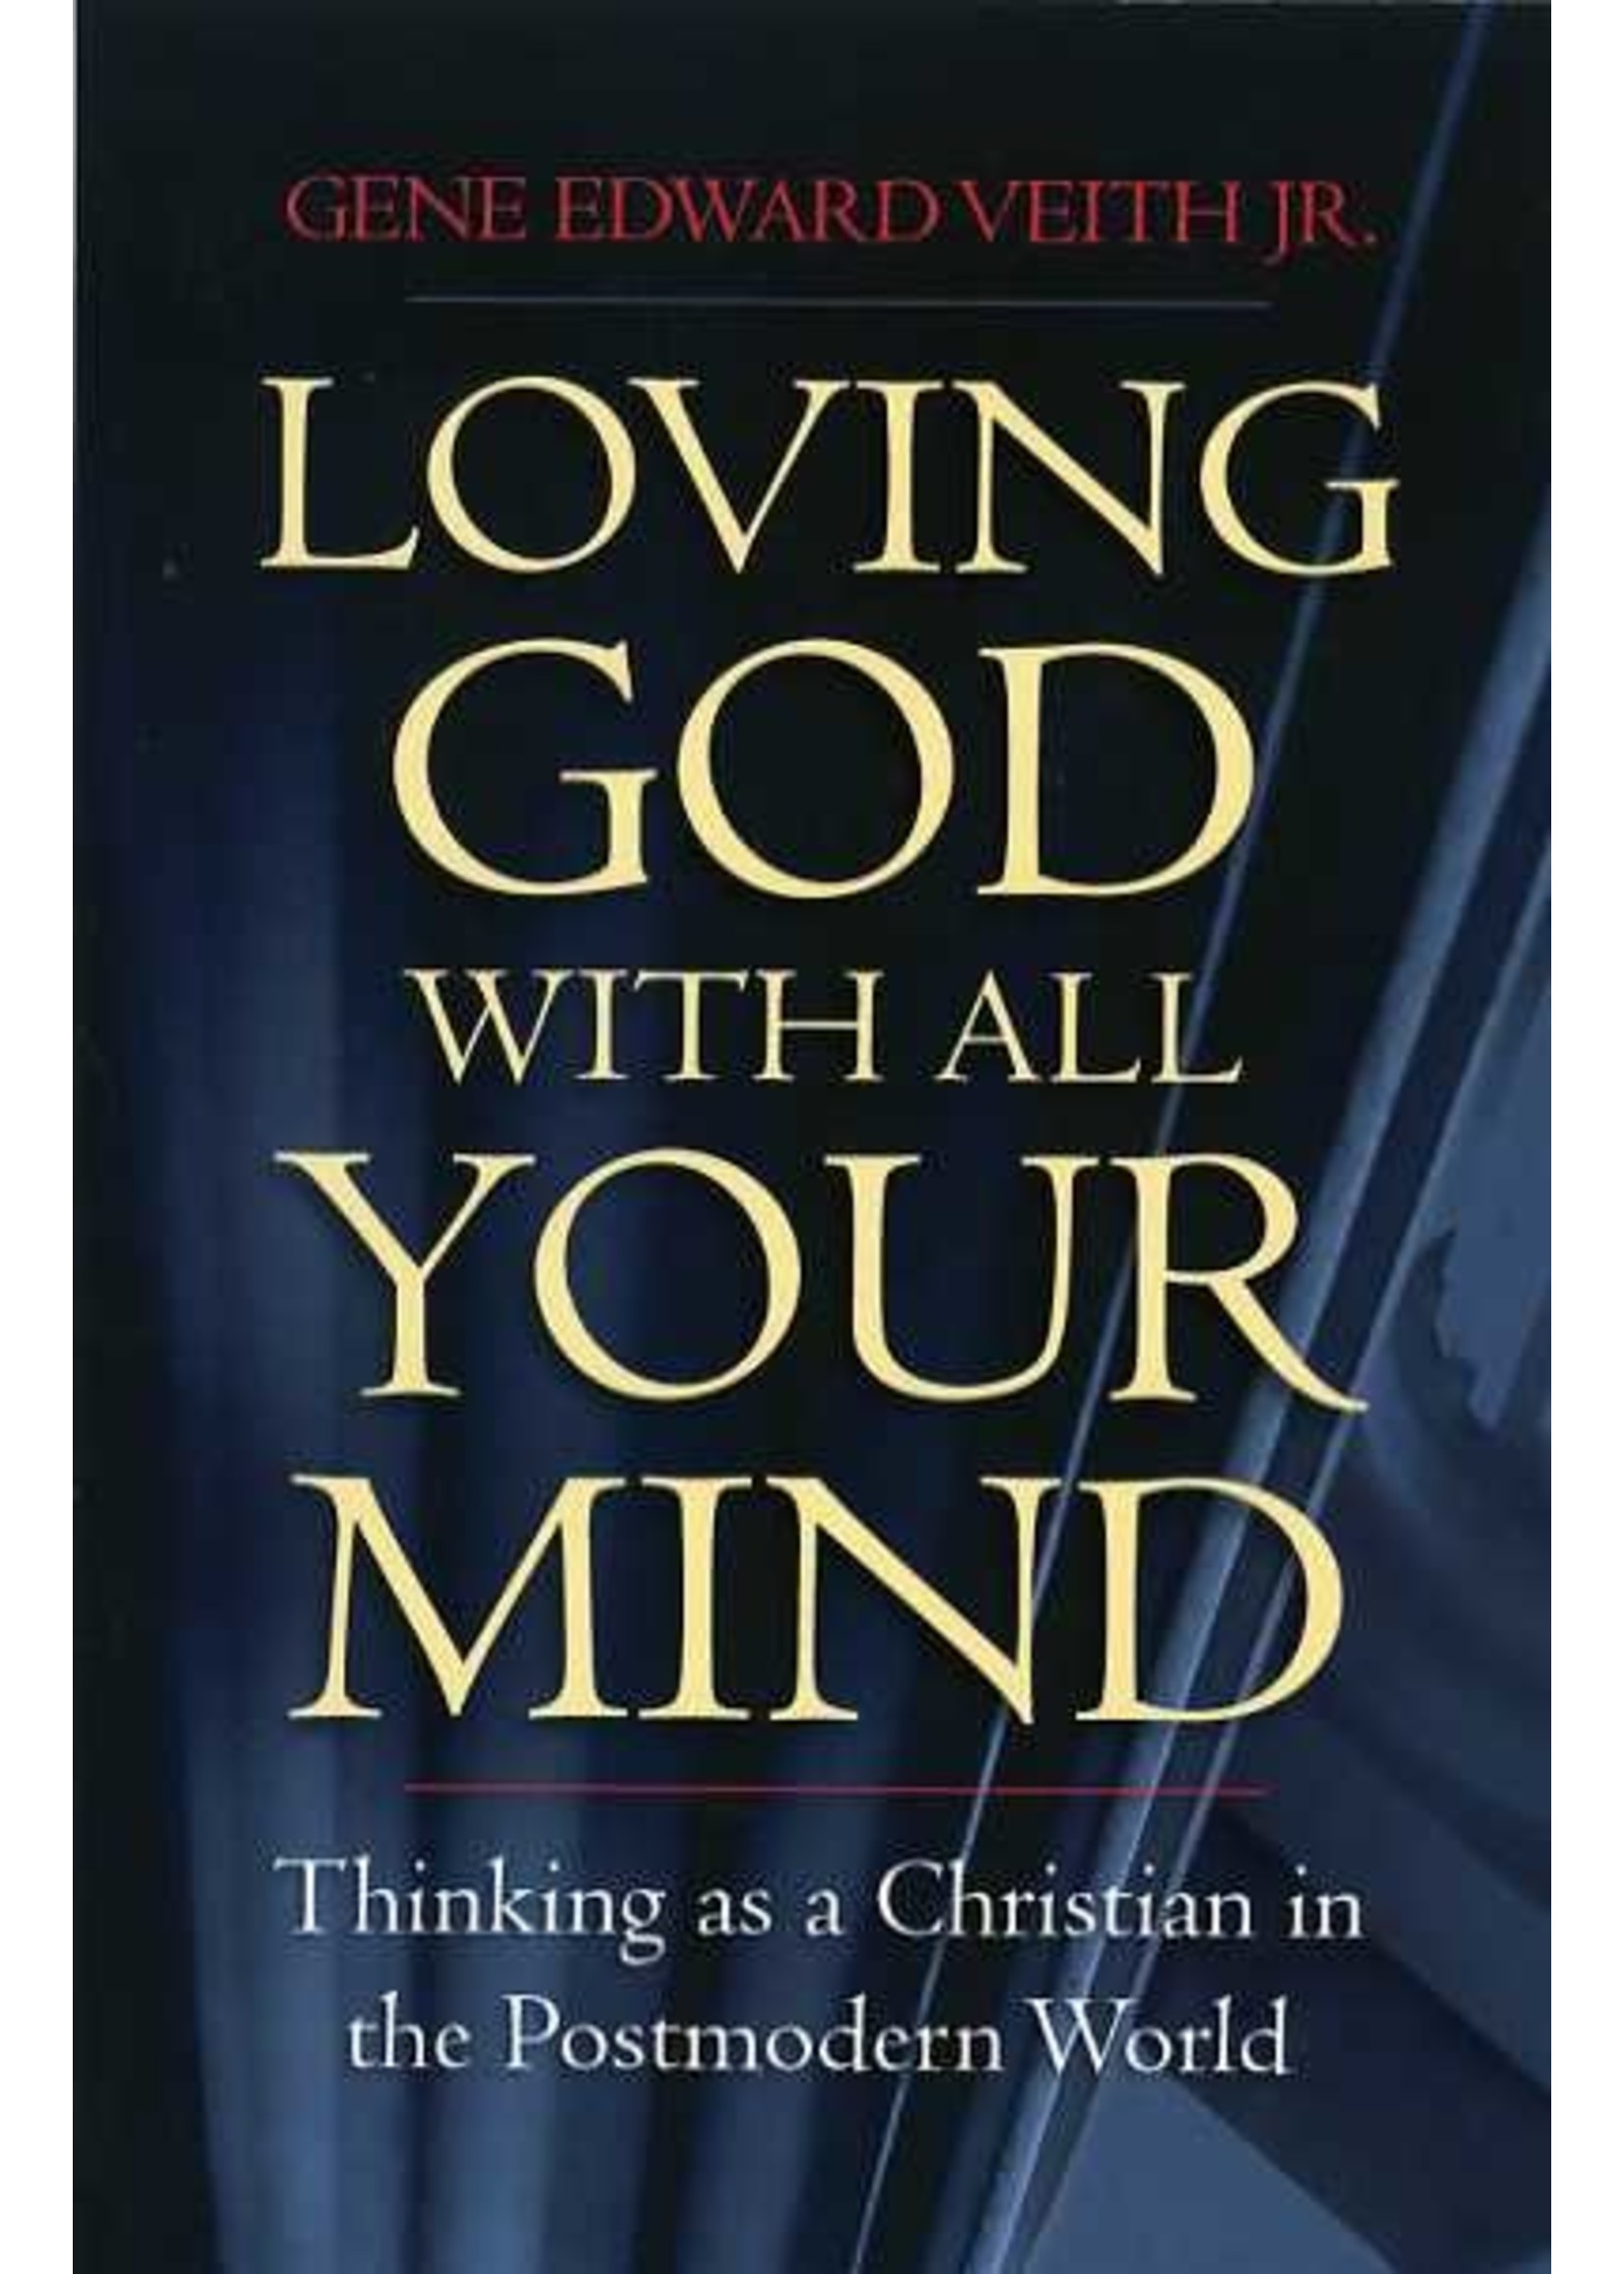 Crossway Loving God with All Your Mind - Gene Veith Jr.